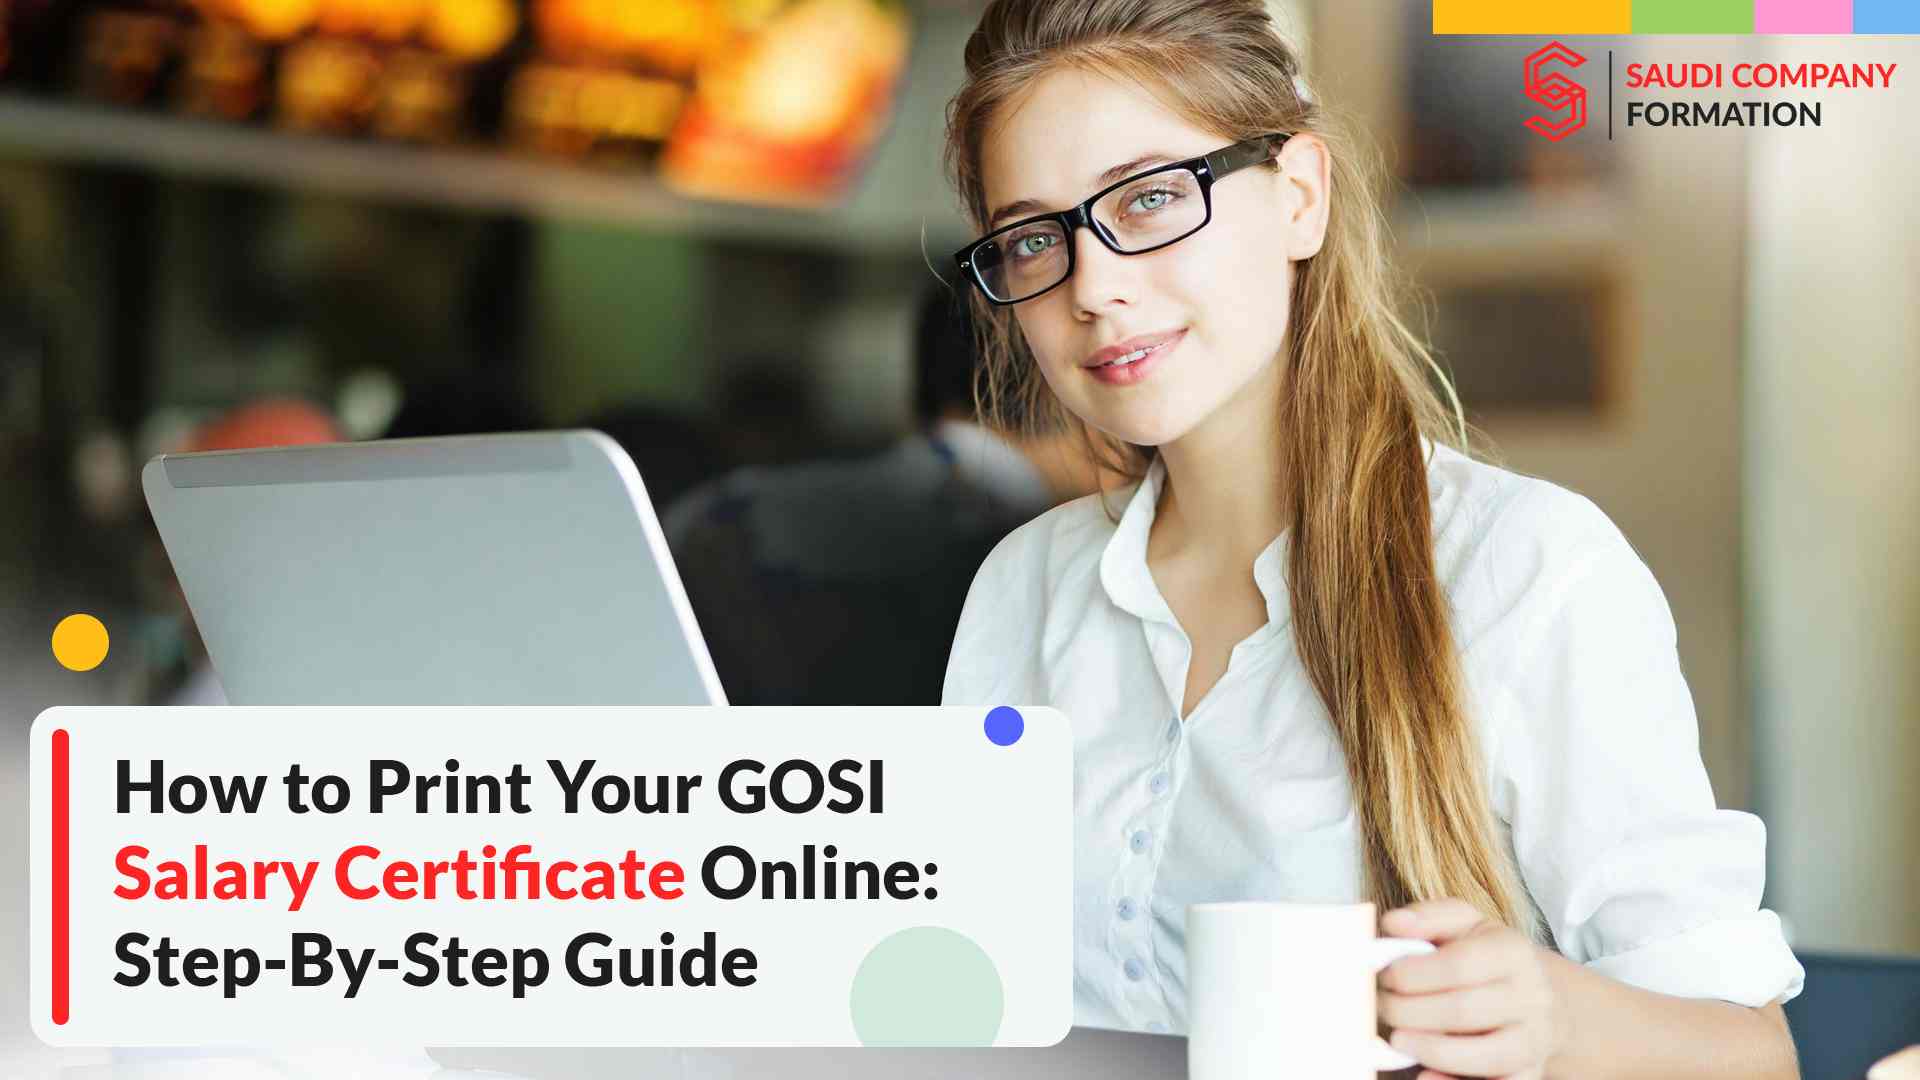 How to Print Your GOSI Salary Certificate Online: Step-By-Step Guide